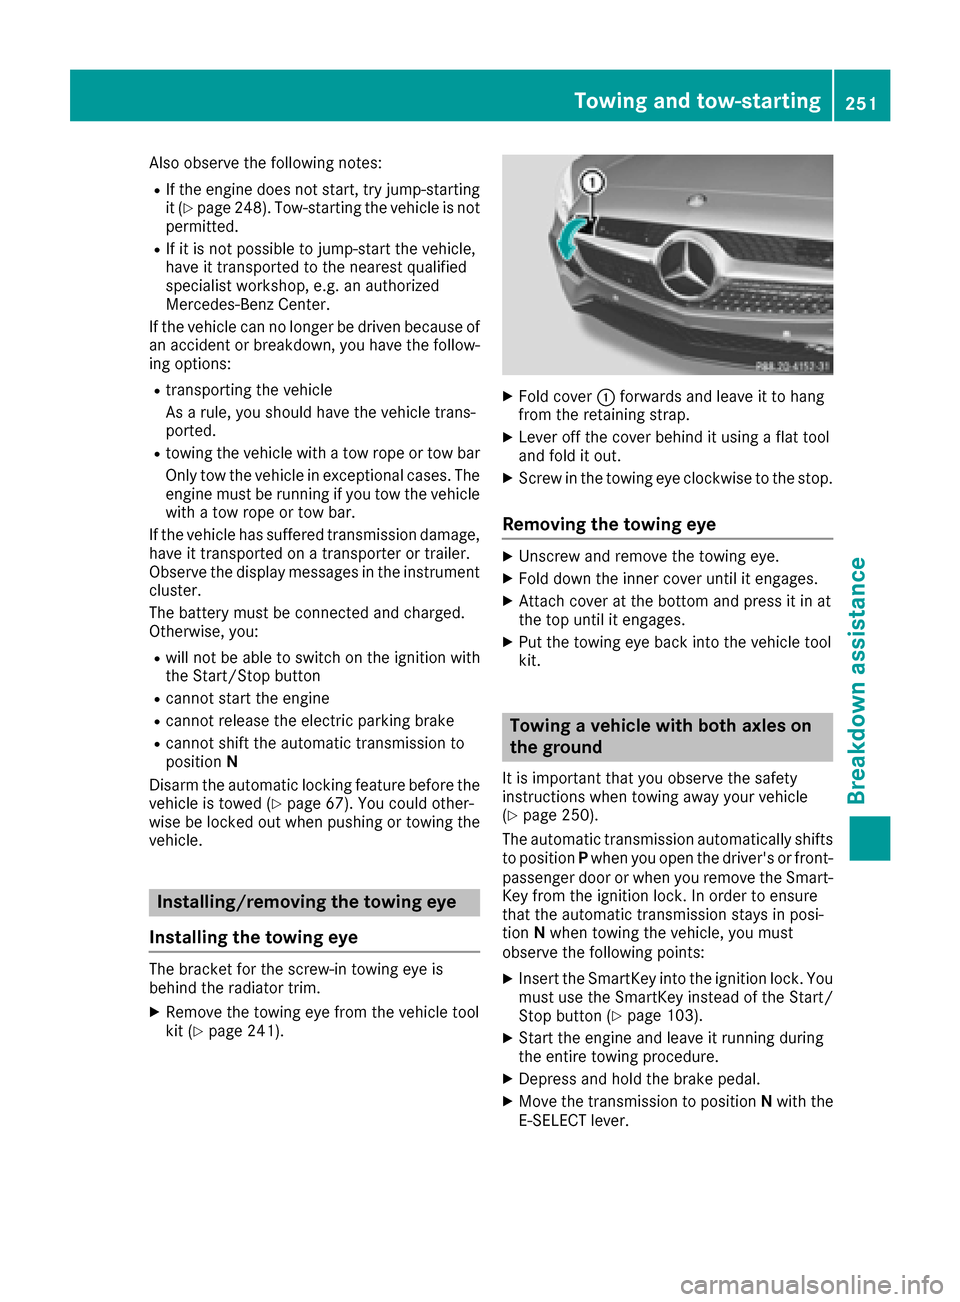 MERCEDES-BENZ AMG GT S 2016 C190 Owners Guide Also observe the following notes:
RIf the engine does not start, try jump-starting
it (Ypage 248). Tow-starting the vehicle is not
permitted.
RIf it is not possible to jump-start the vehicle,
have it 